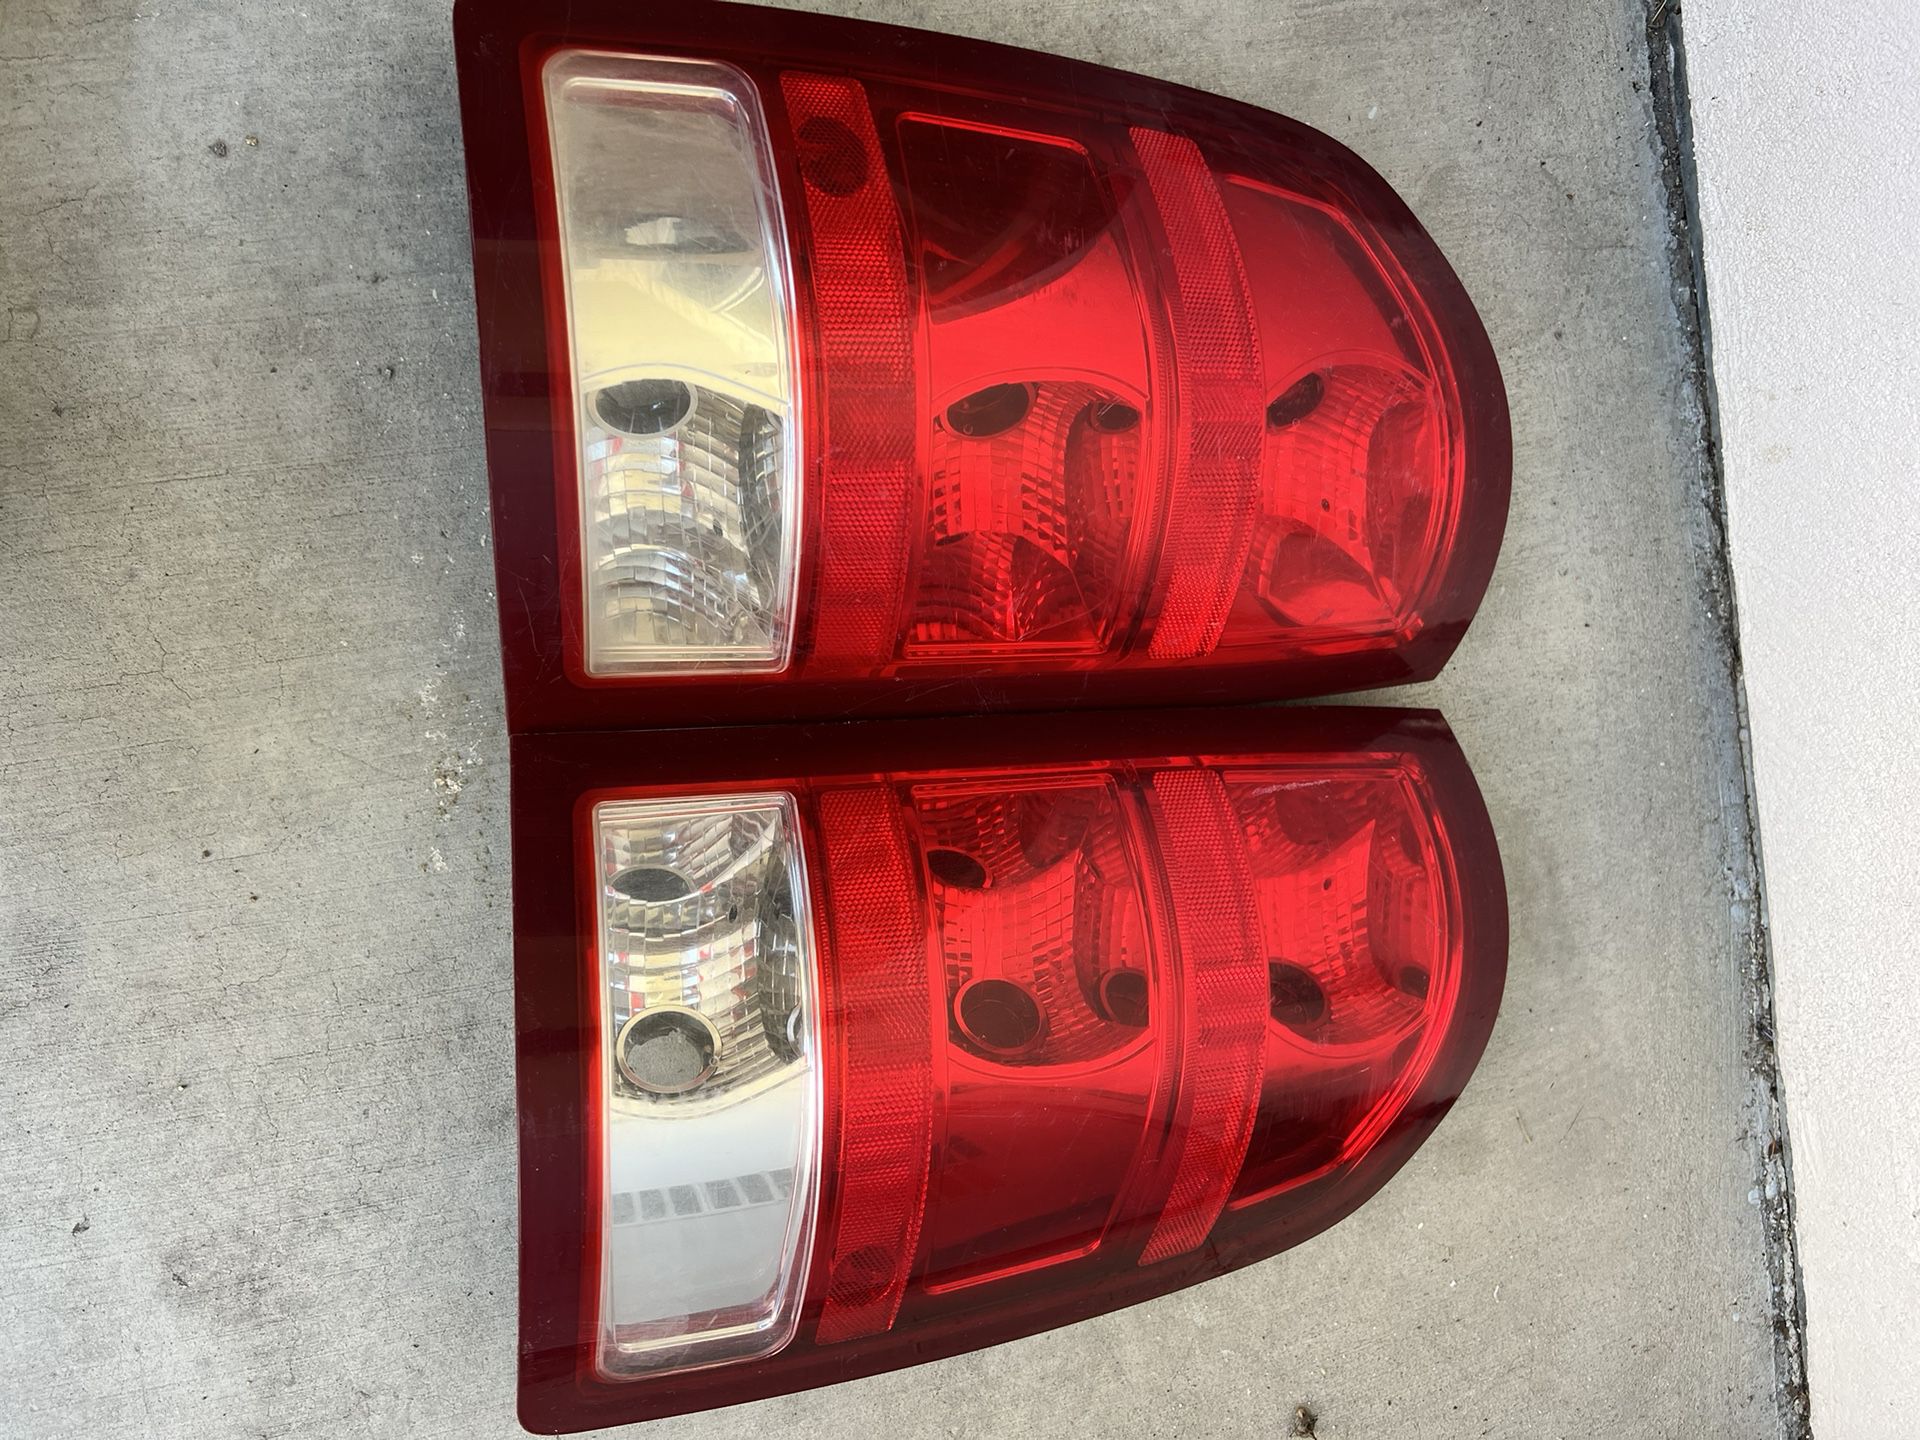 07-13 GMC/chevy Taillight’s 